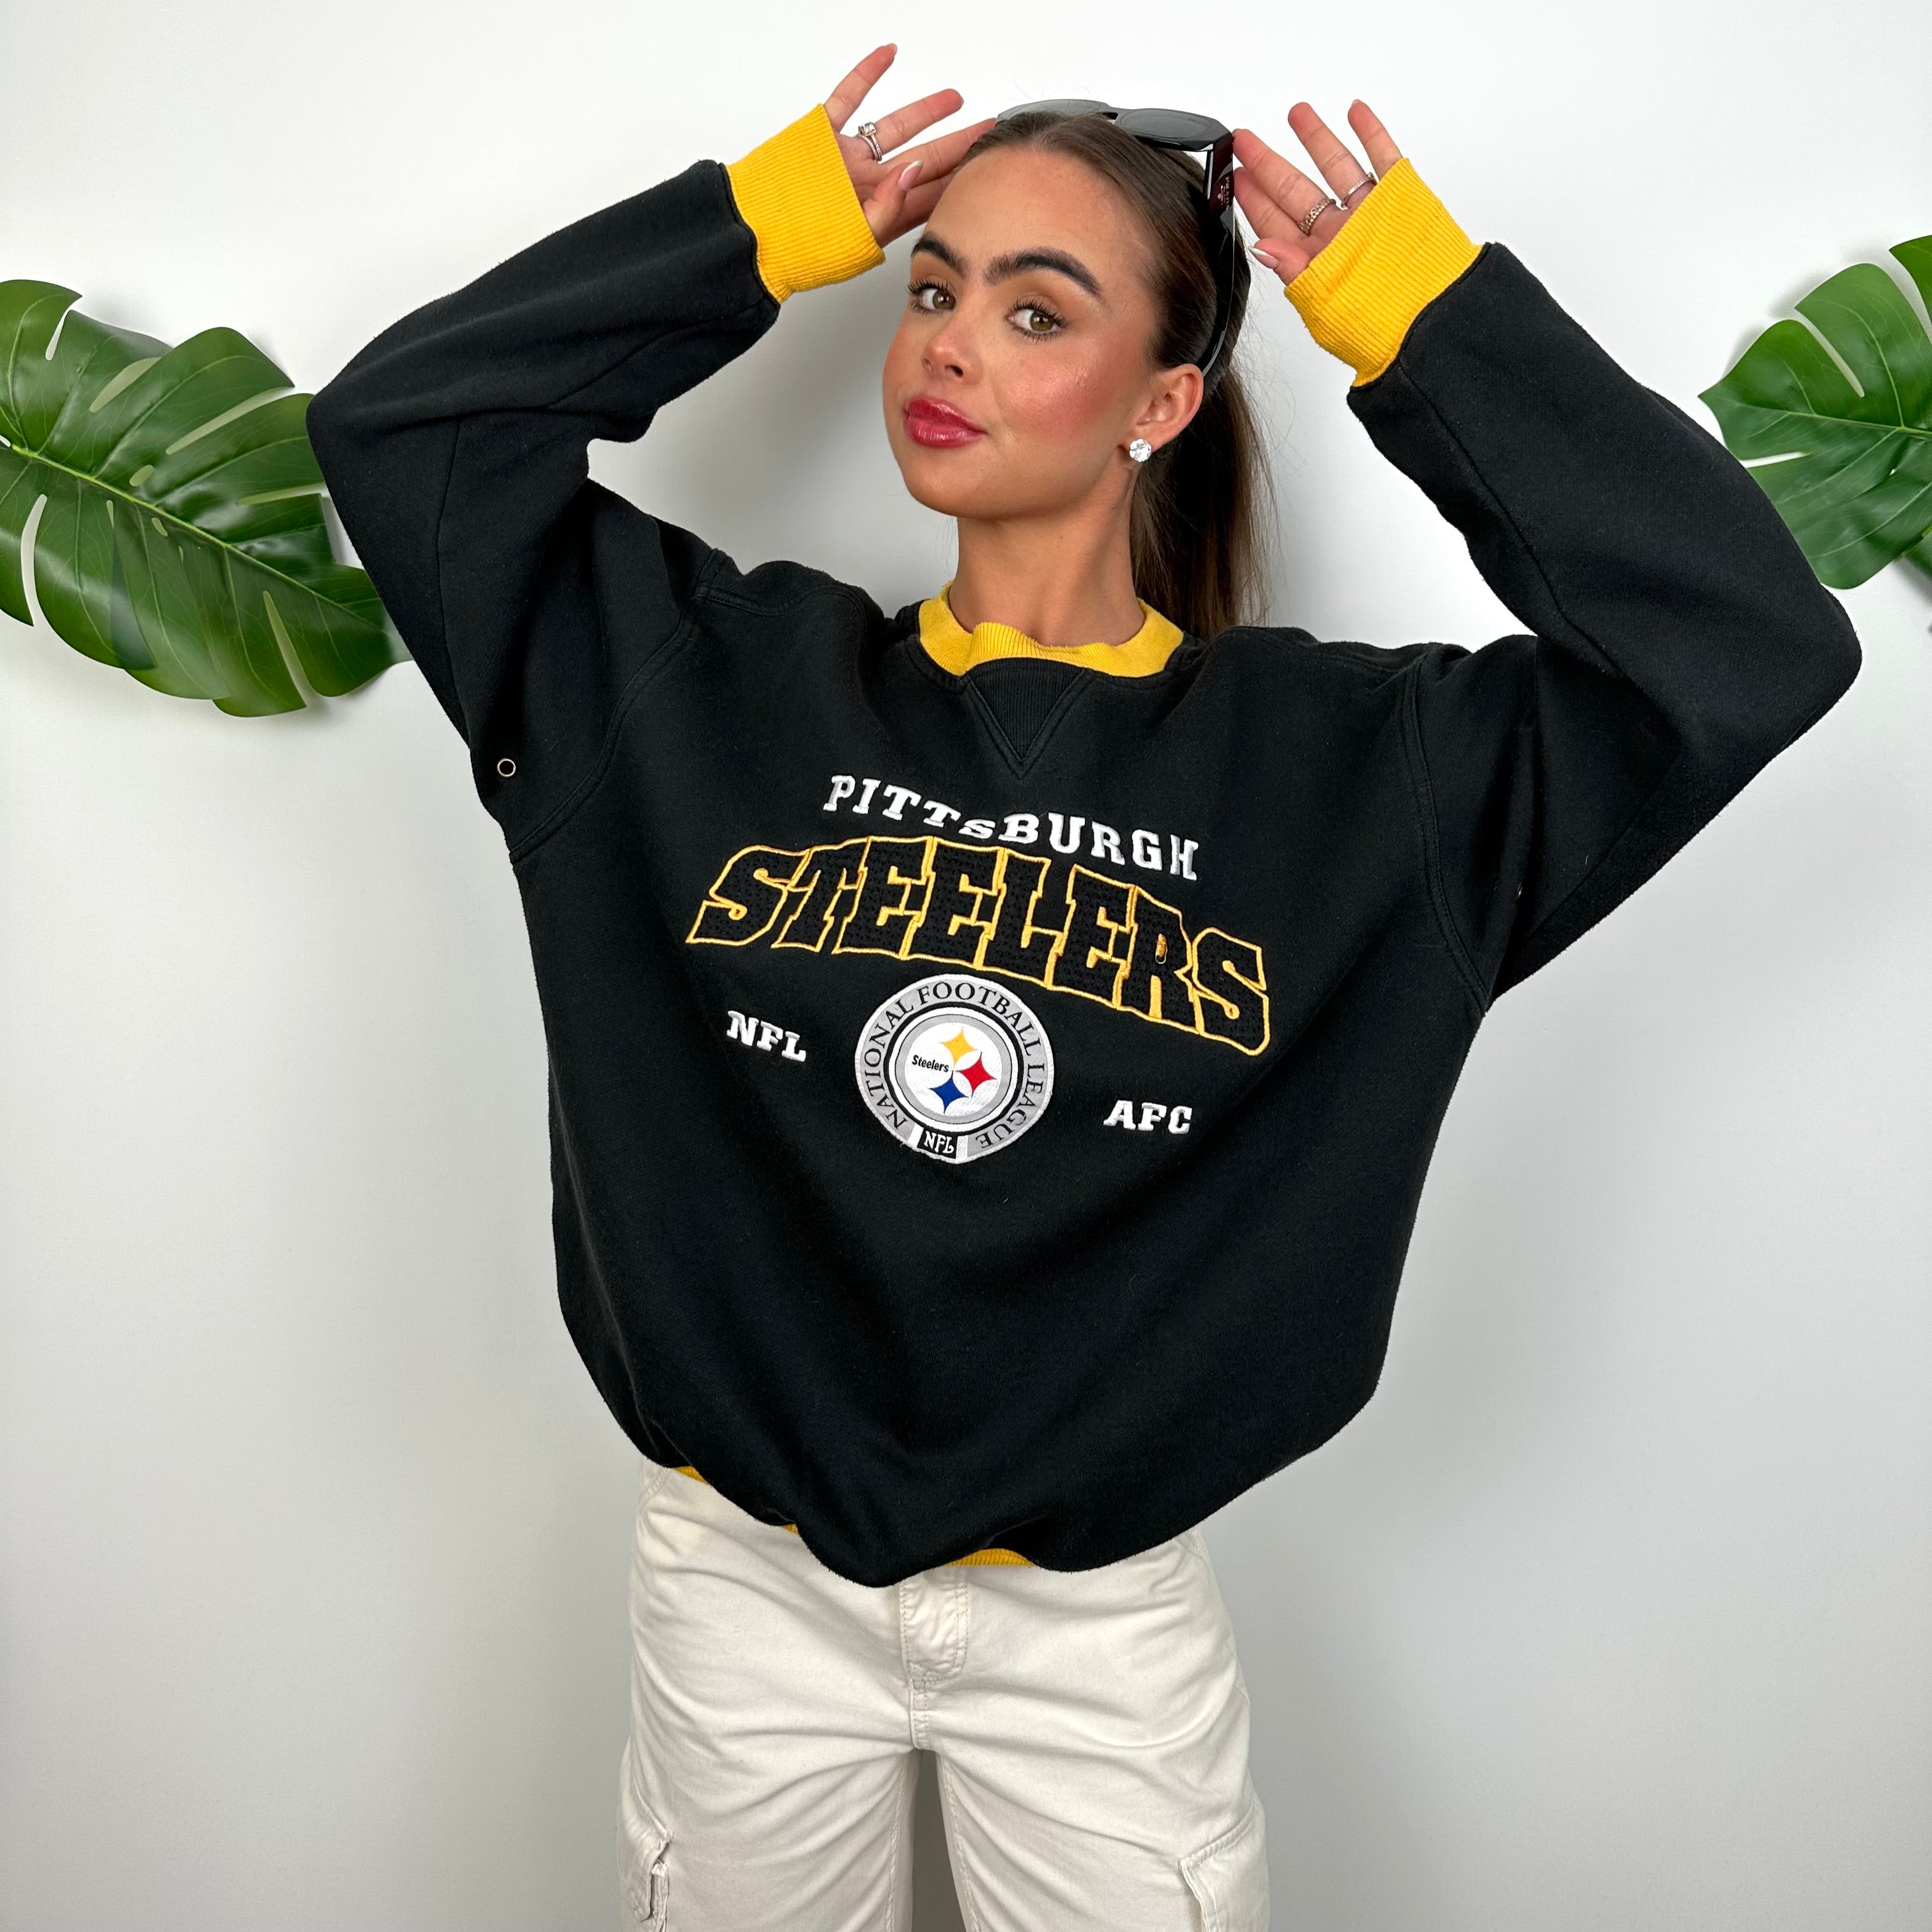 NFL Pittsburgh Steelers Black Embroidered Spell Out Sweatshirt (M)